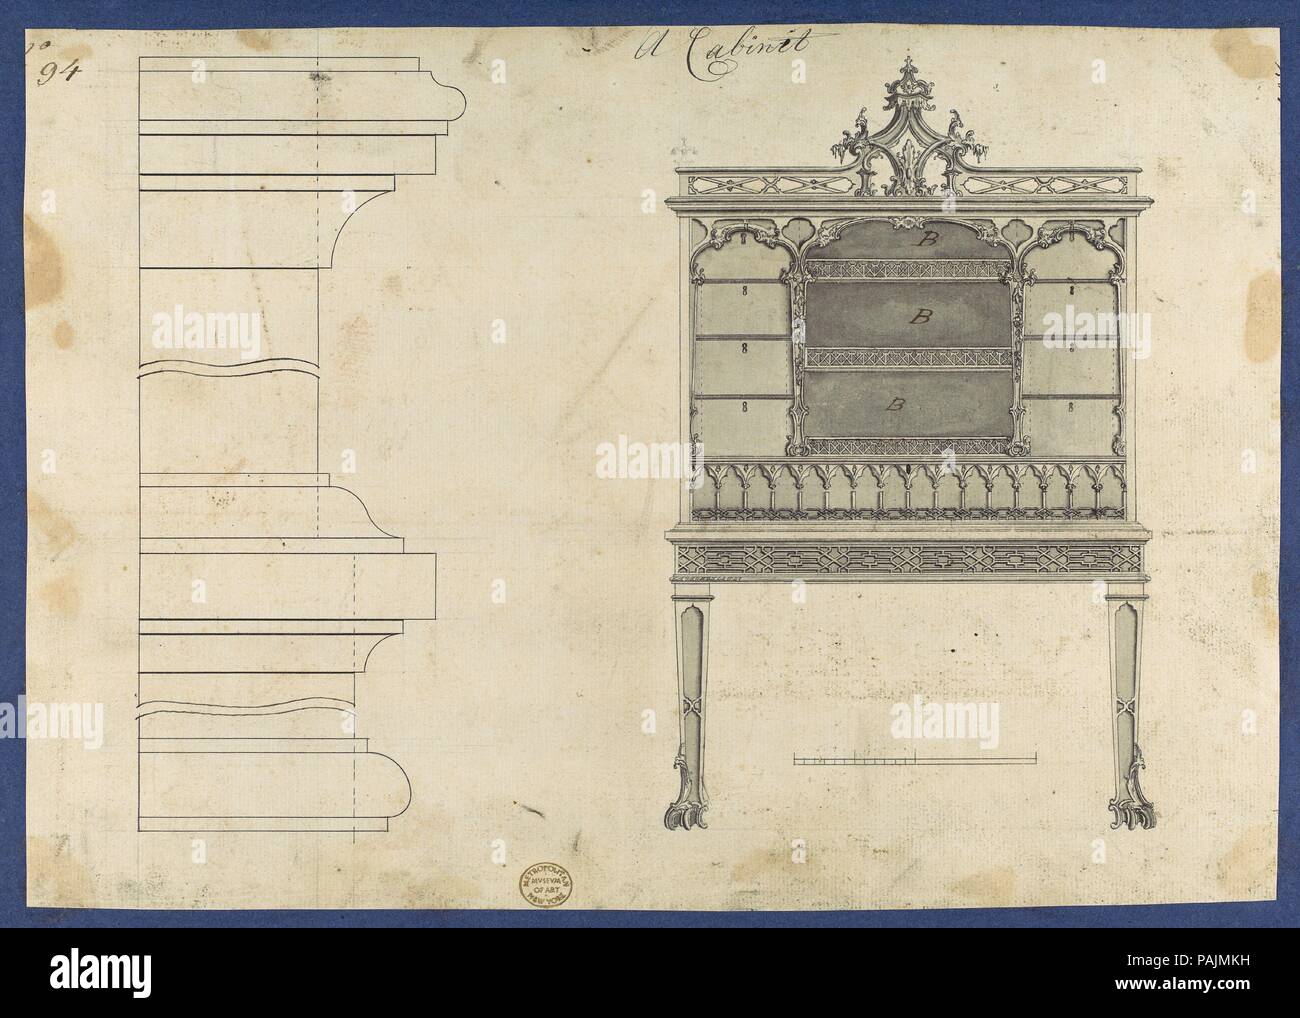 Cabinet, from Chippendale Drawings, Vol. II. Artist: Thomas Chippendale (British, baptised Otley, West Yorkshire 1718-1779 London). Dimensions: sheet: 8 7/16 x 12 in. (21.4 x 30.4 cm). Published in: London. Date: 1754.  Preparatory drawing for Thomas Chippendale's 'Gentleman and Cabinet Maker's Director'. Published in reverse as plate XCIV in the 1754 and 1755 editions, renumbered as plate CXXIV in the 1762 edition. Museum: Metropolitan Museum of Art, New York, USA. Stock Photo